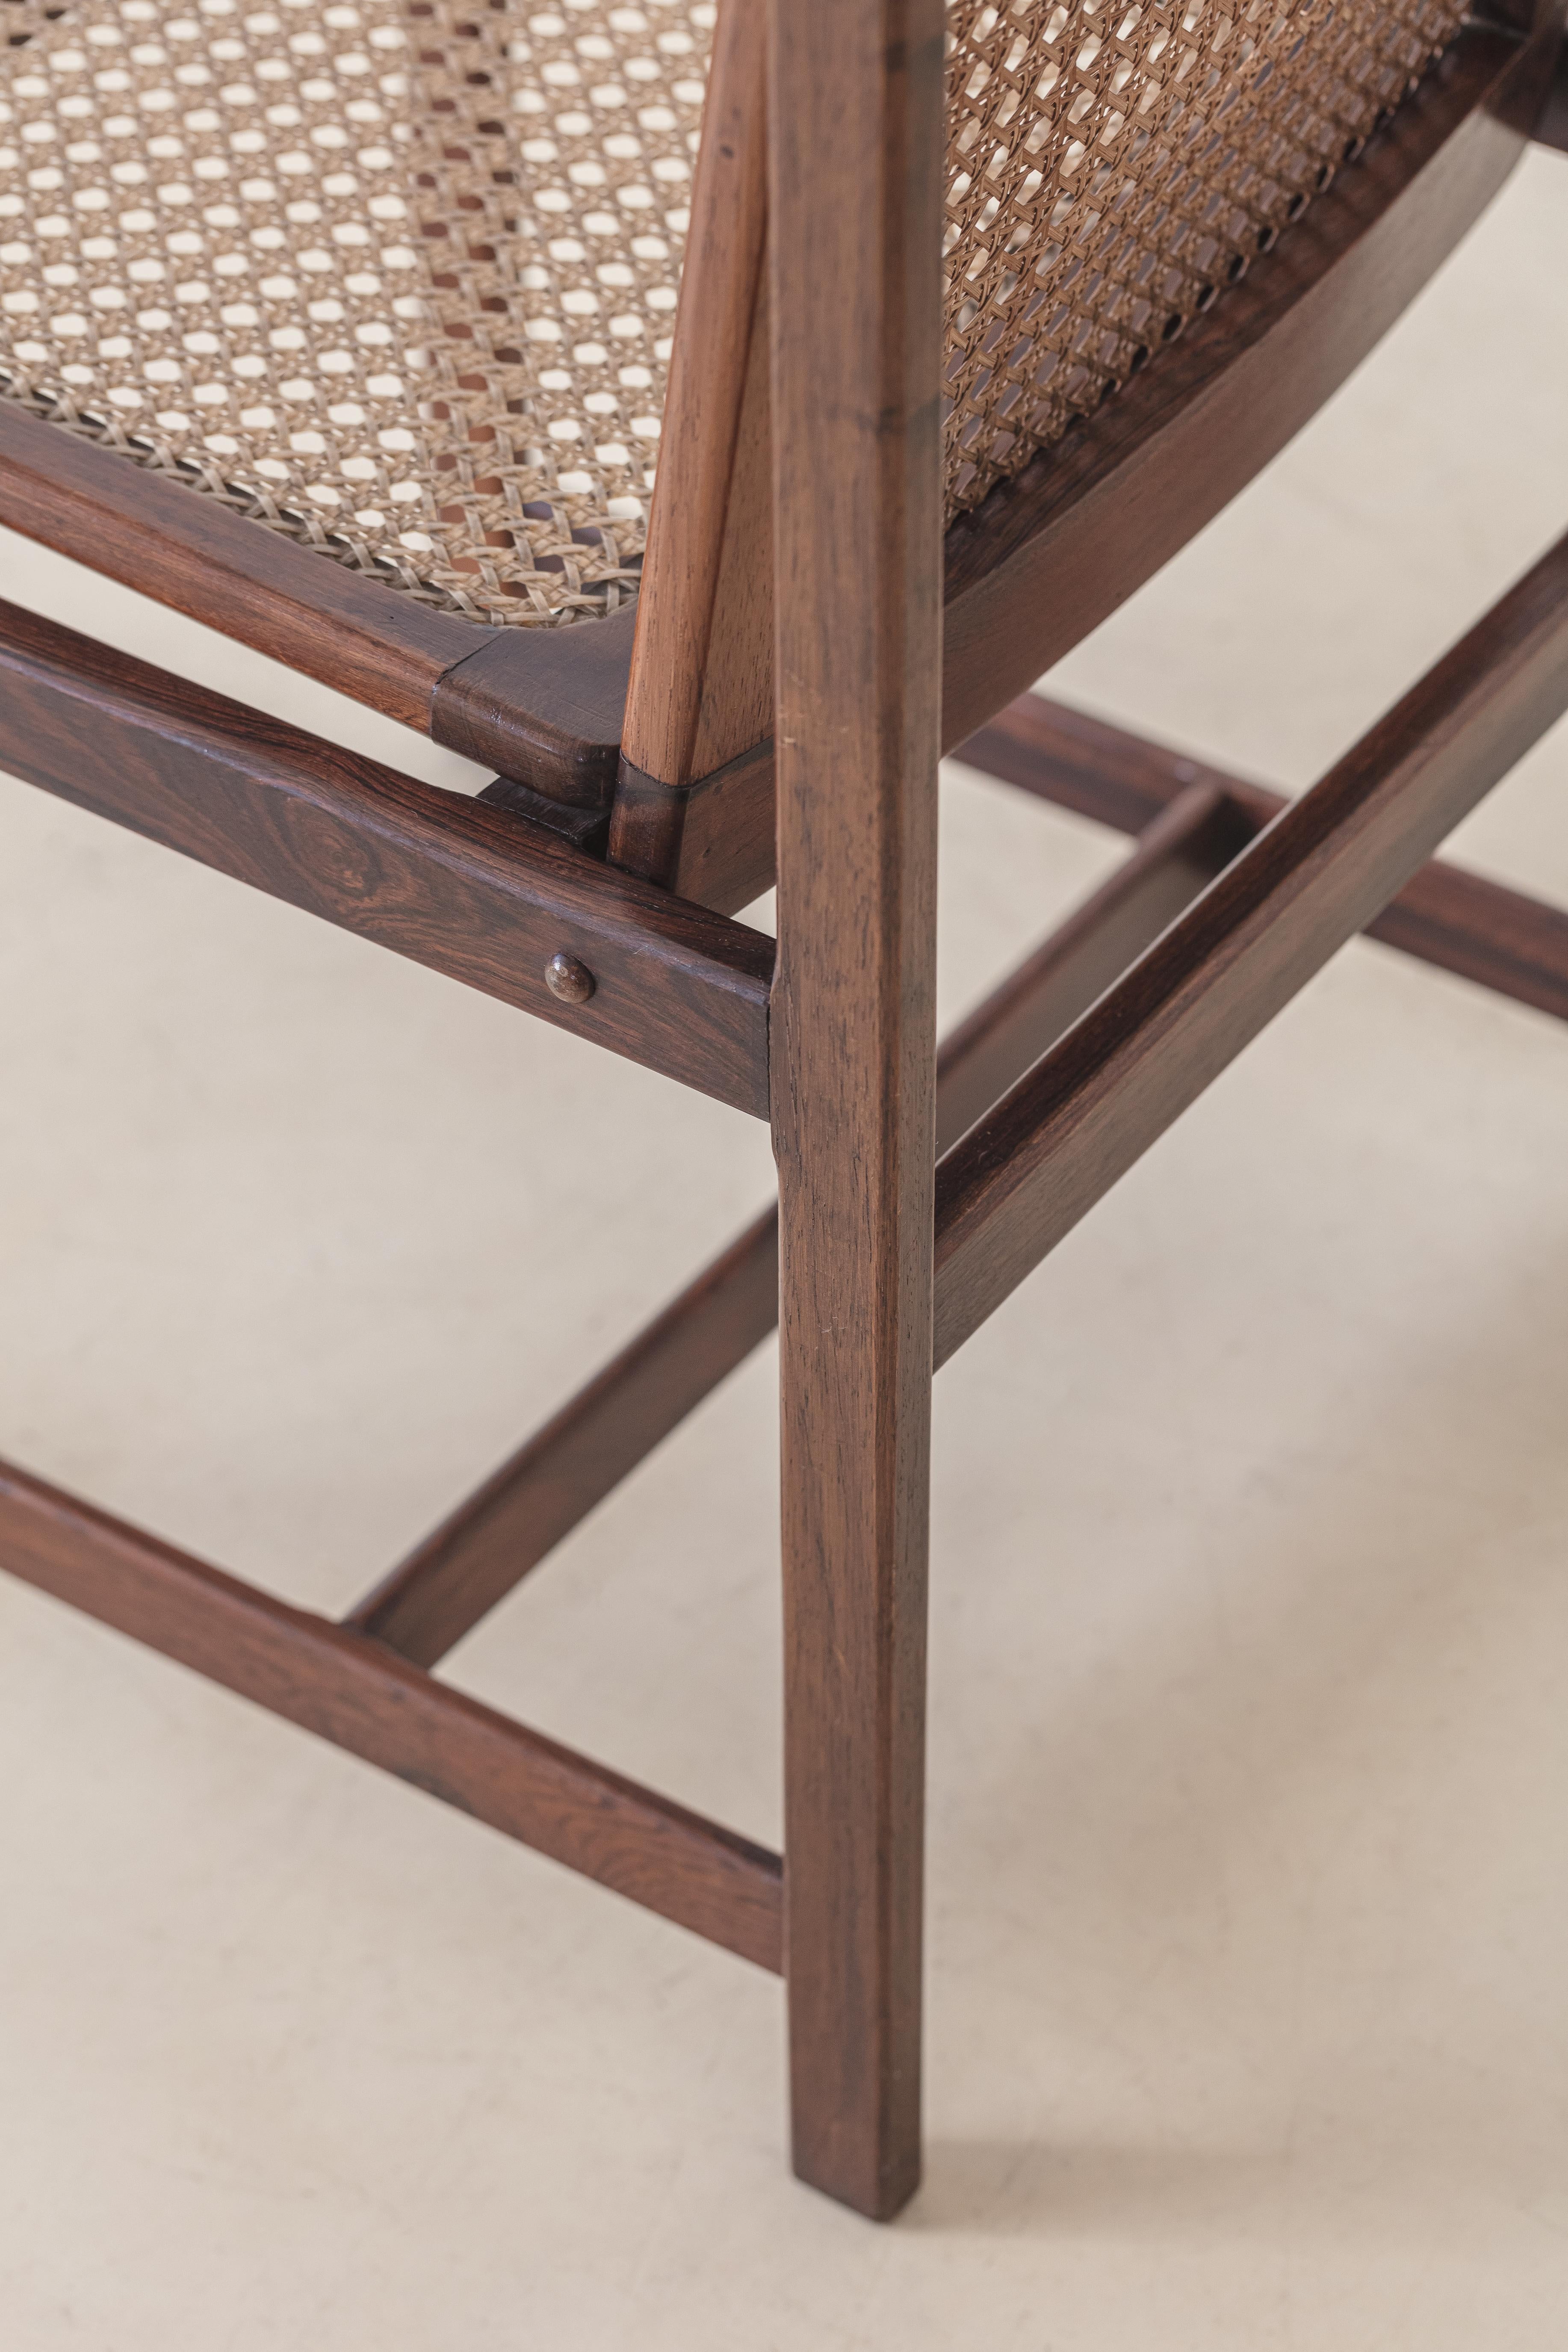 Celina Decorações set of six Dining Chairs, Rosewood and Cane, Mid-Century 1960s en vente 7